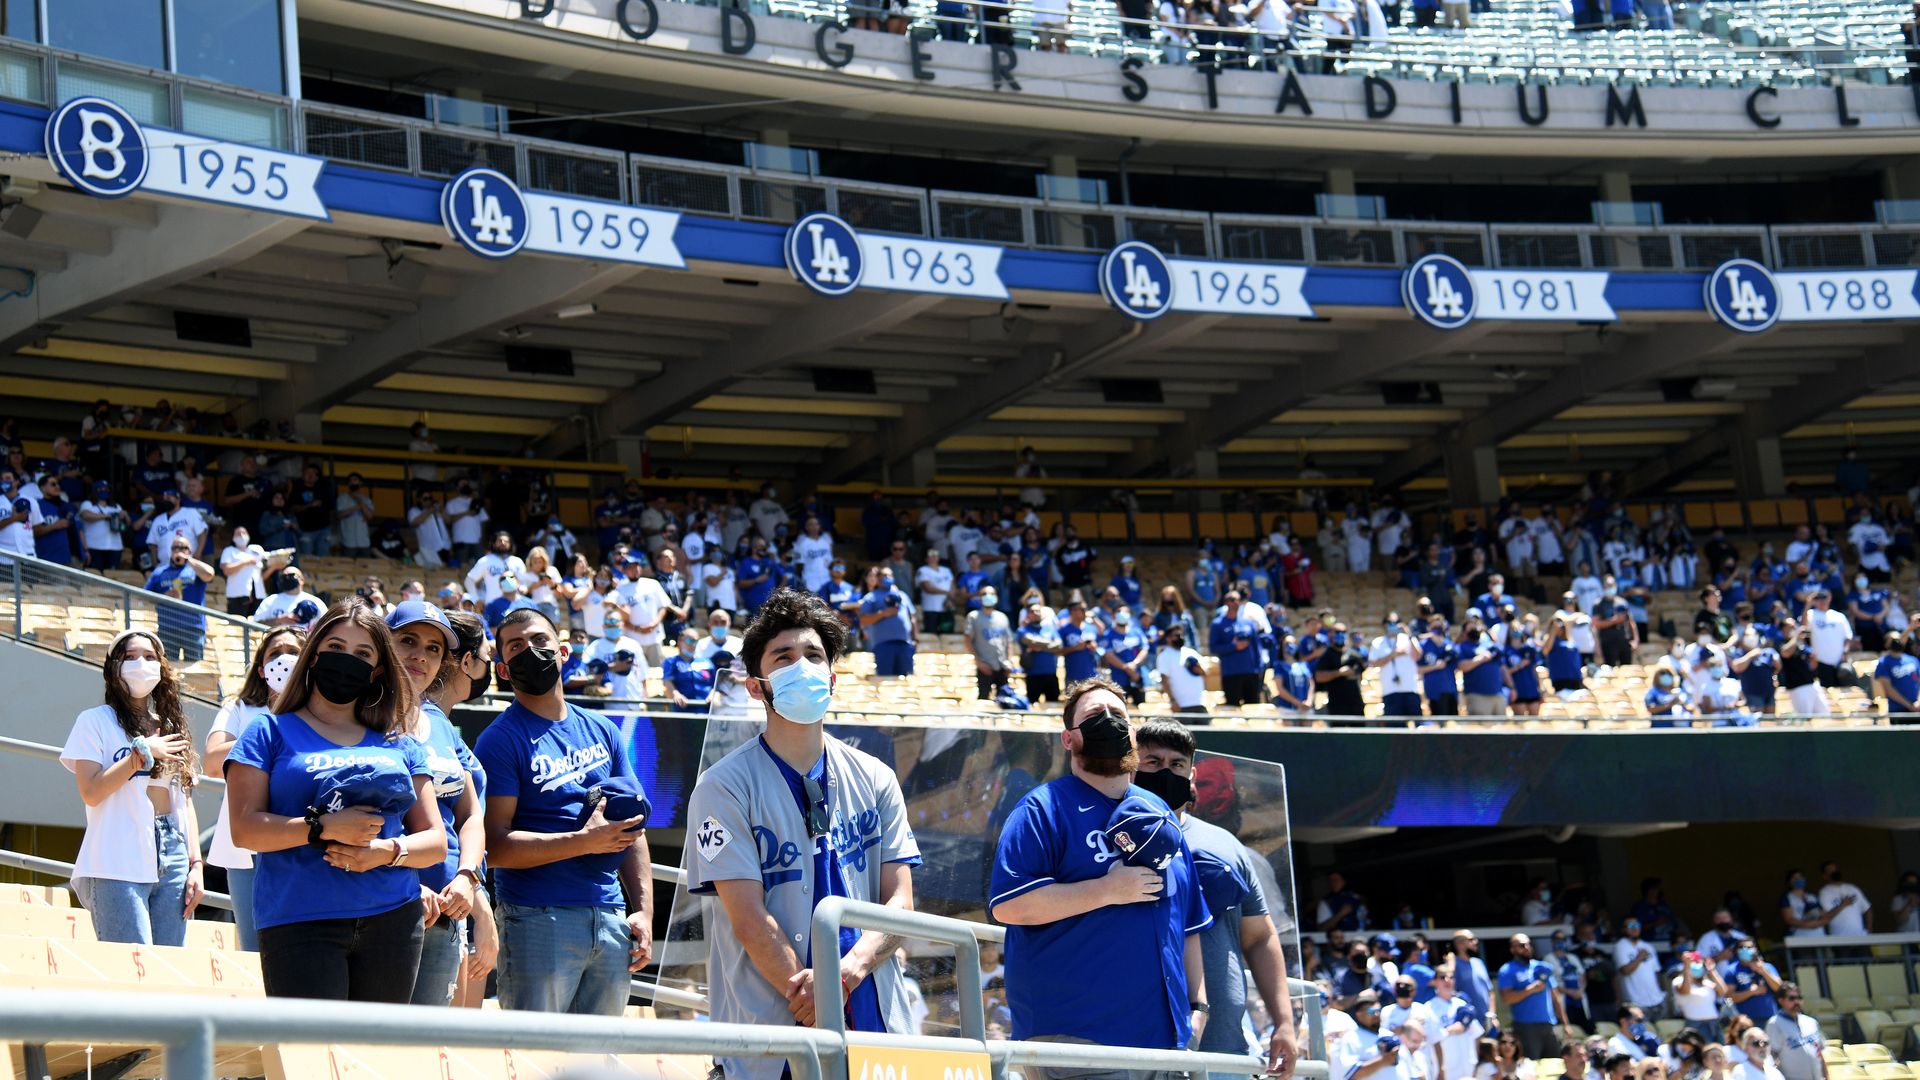 People wearing masks standing for the national anthem at Dodgers Stadium.